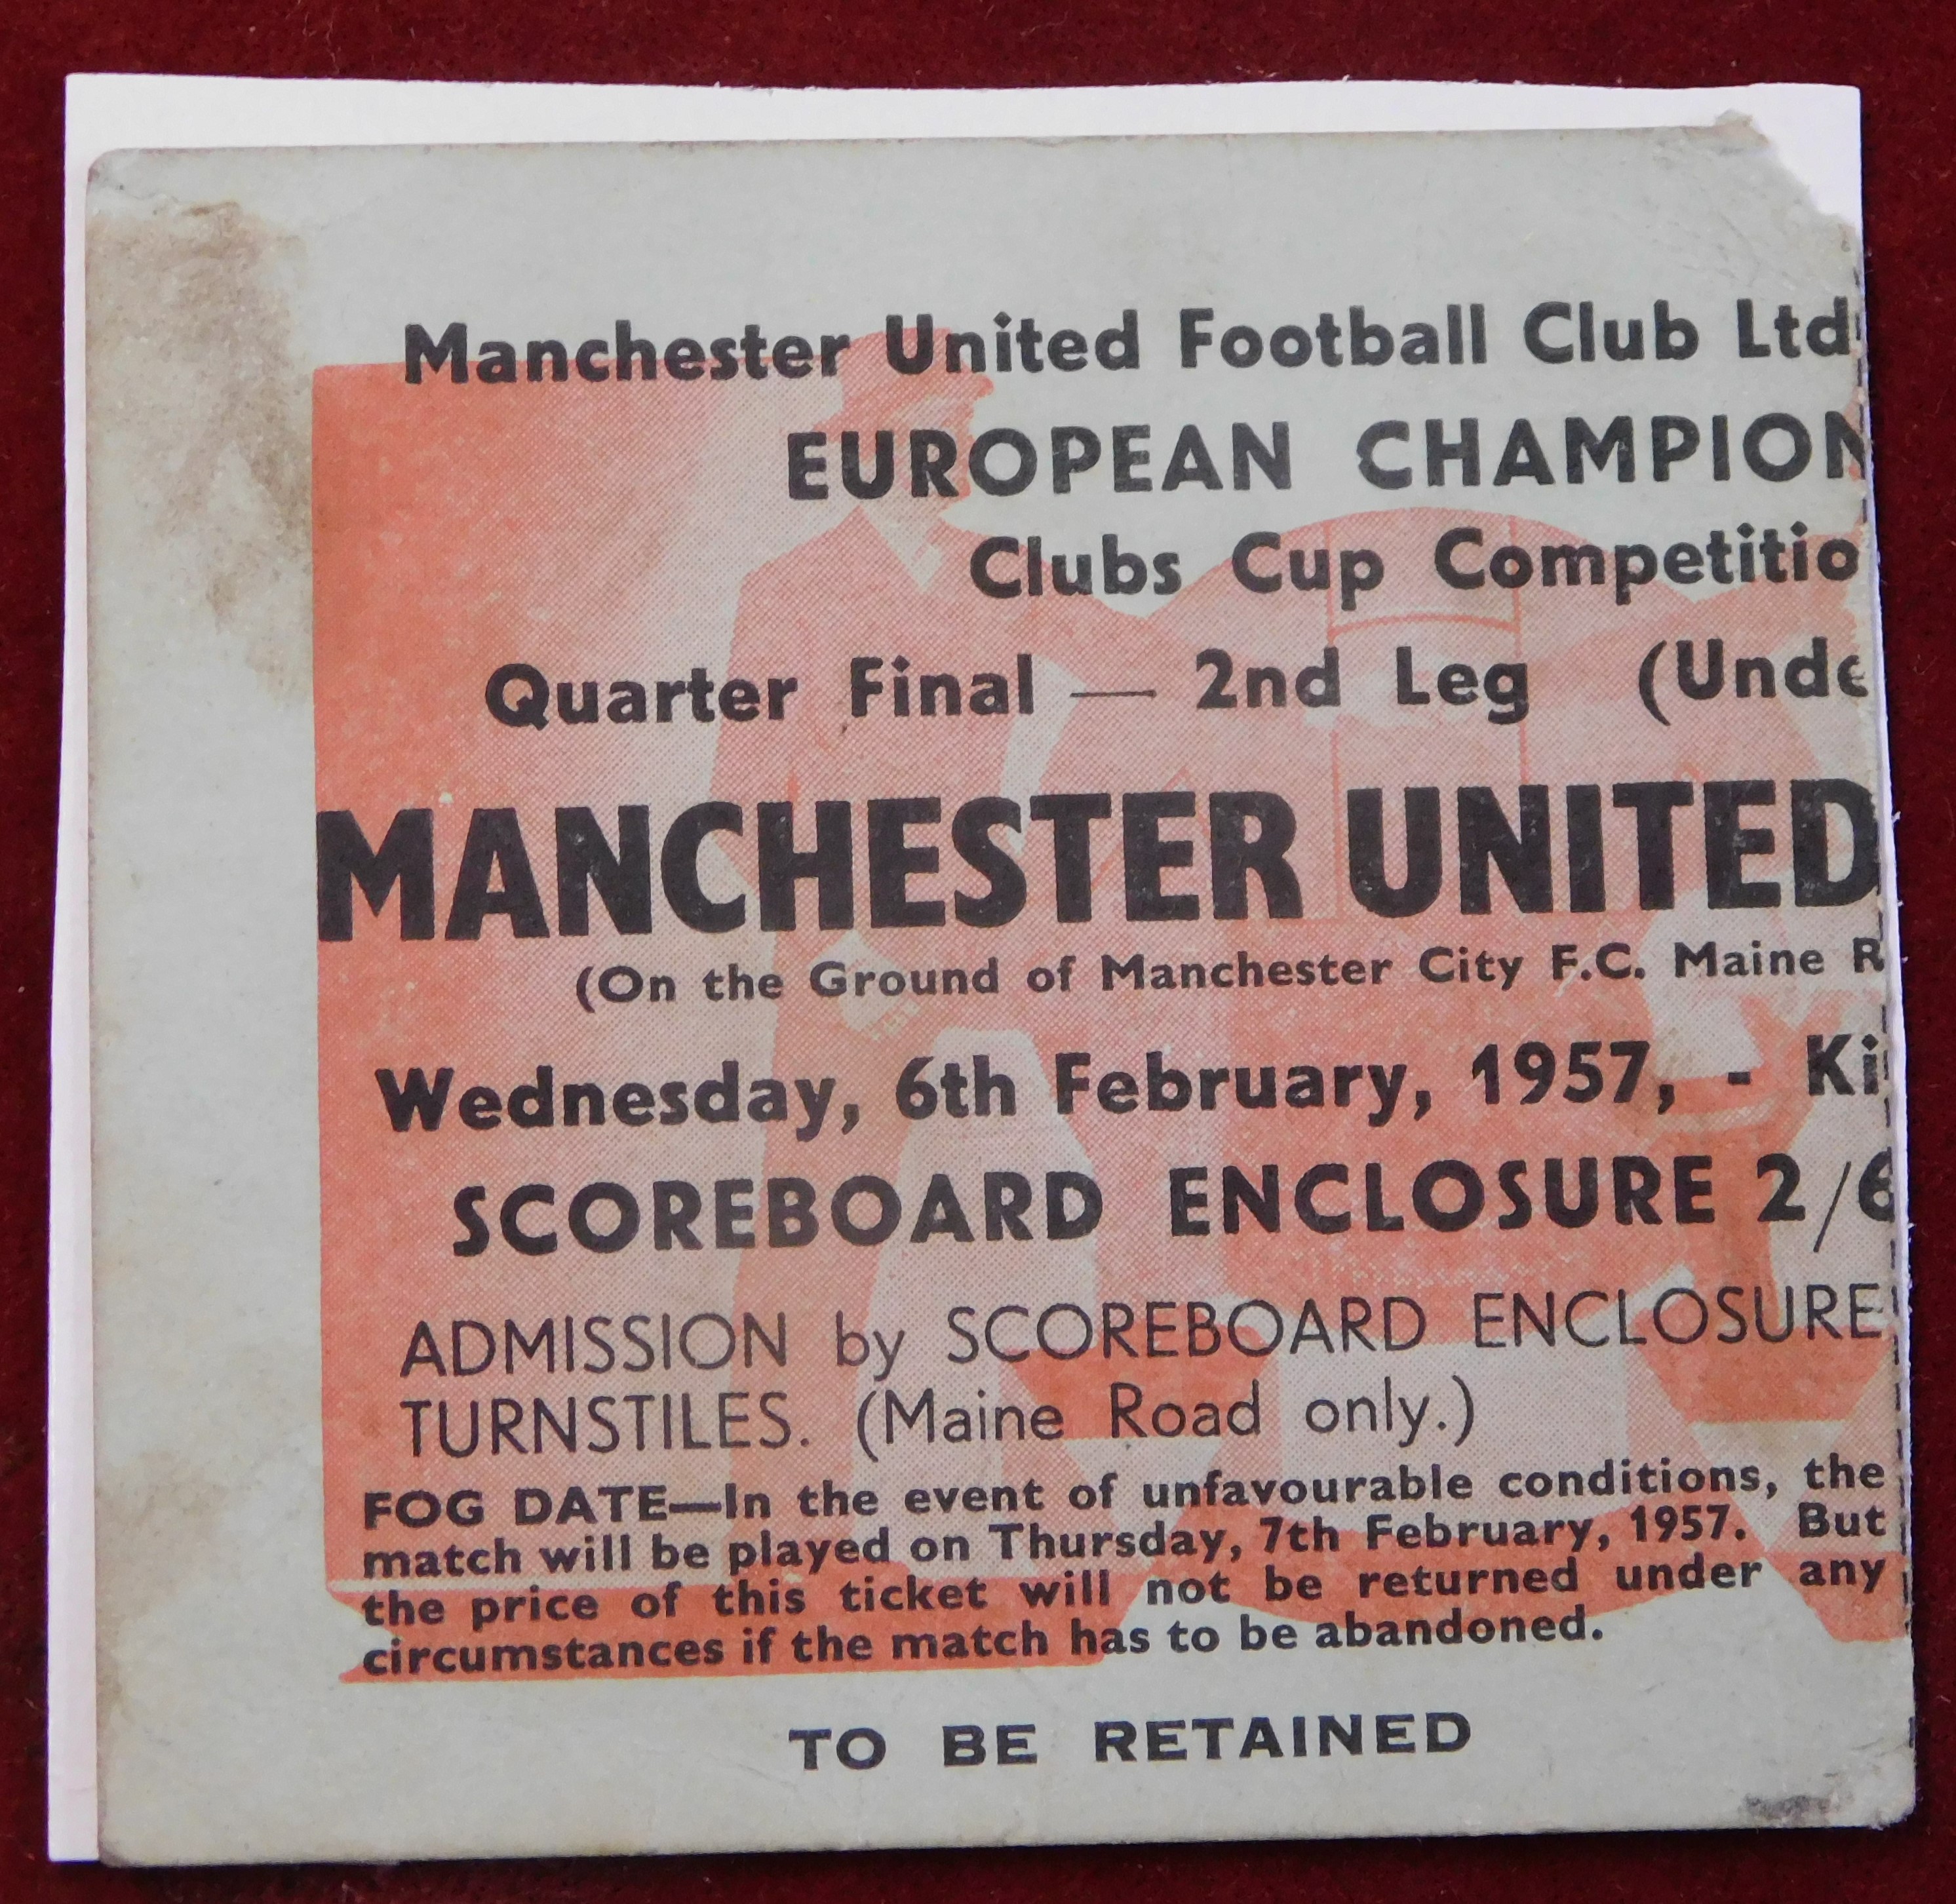 Manchester United home tickets from the 1956/57 season v Manchester City (League), (scorers, folds), - Image 4 of 4